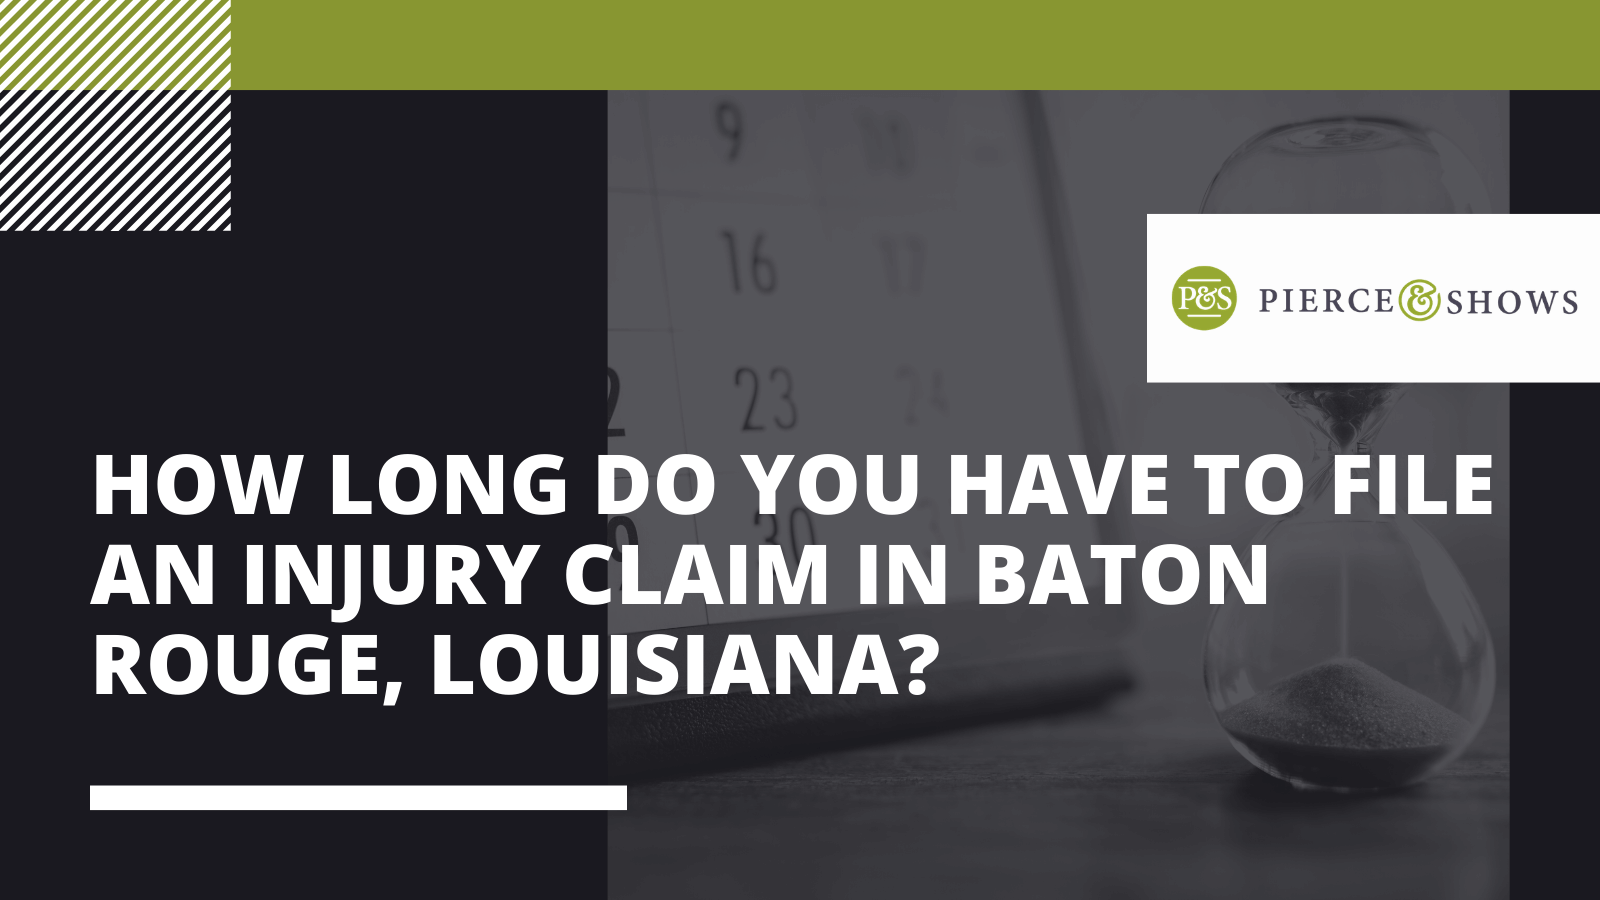 How long do you have to file an injury claim in Baton Rouge, Louisiana?- Pierce & Shows injury attorney Baton Rouge, Louisiana